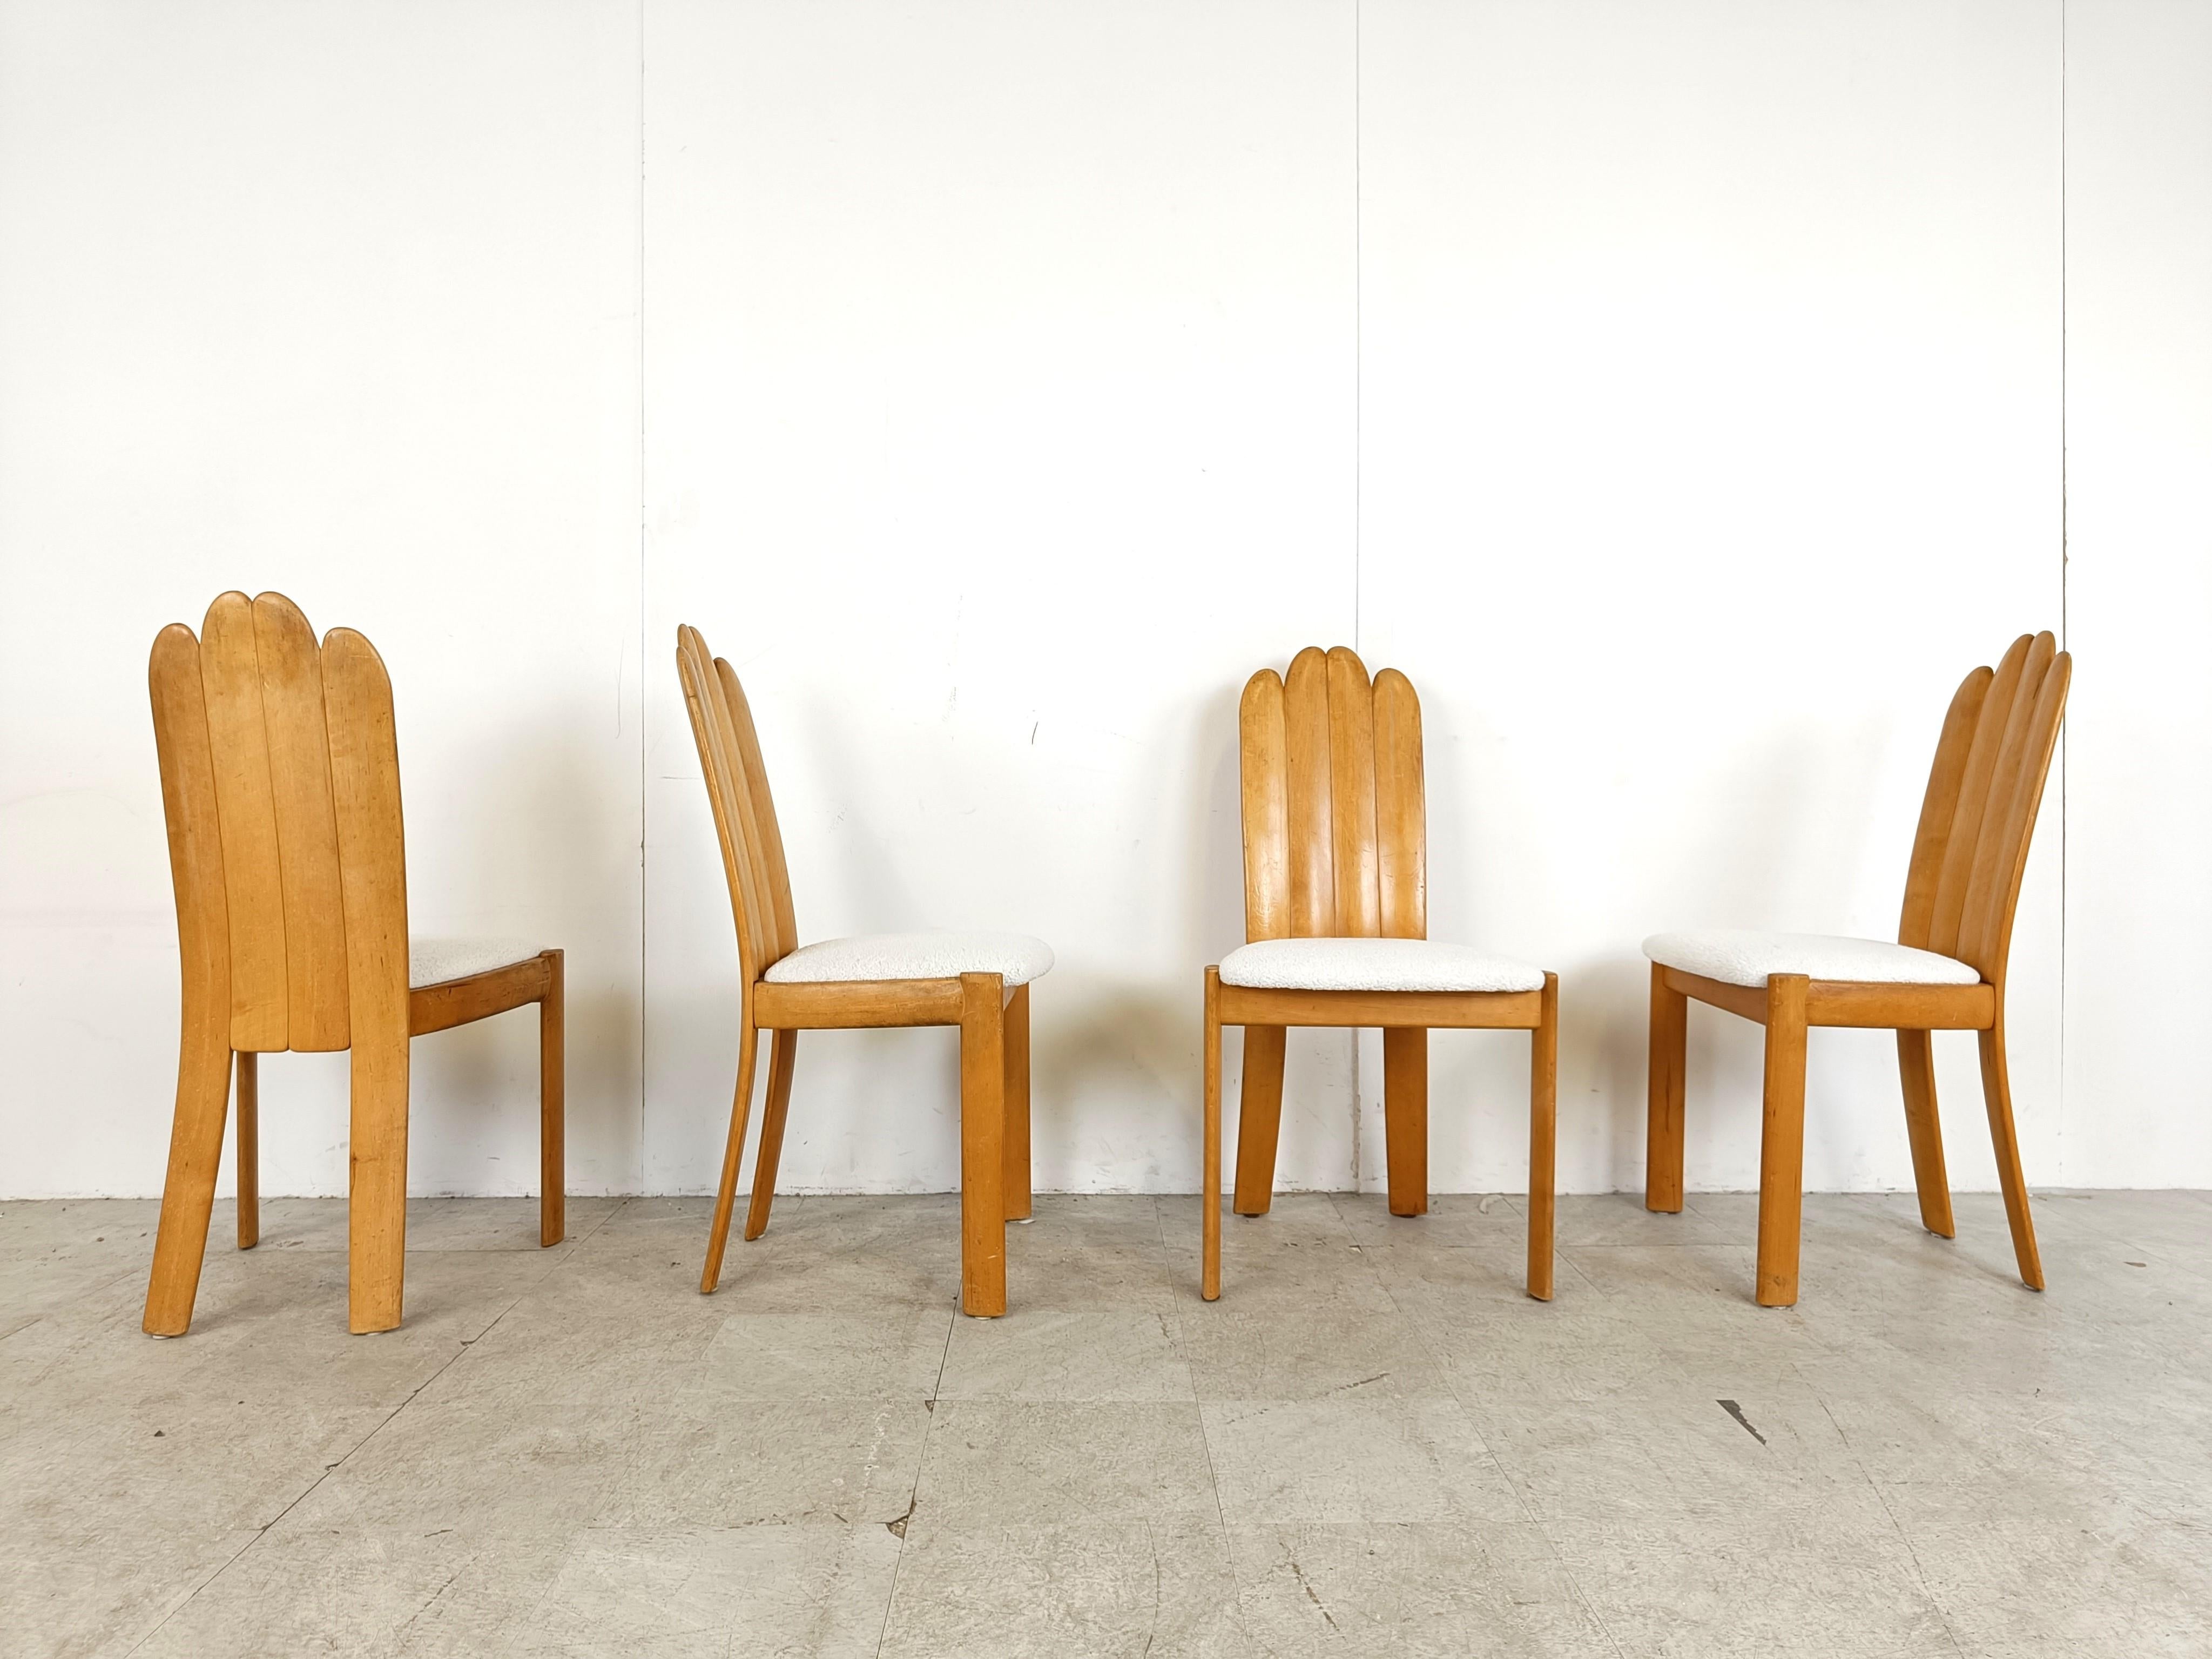 Set of 4 scandinavian dining chairs by Vamdrup Stolefabrik, 1960s For Sale 1